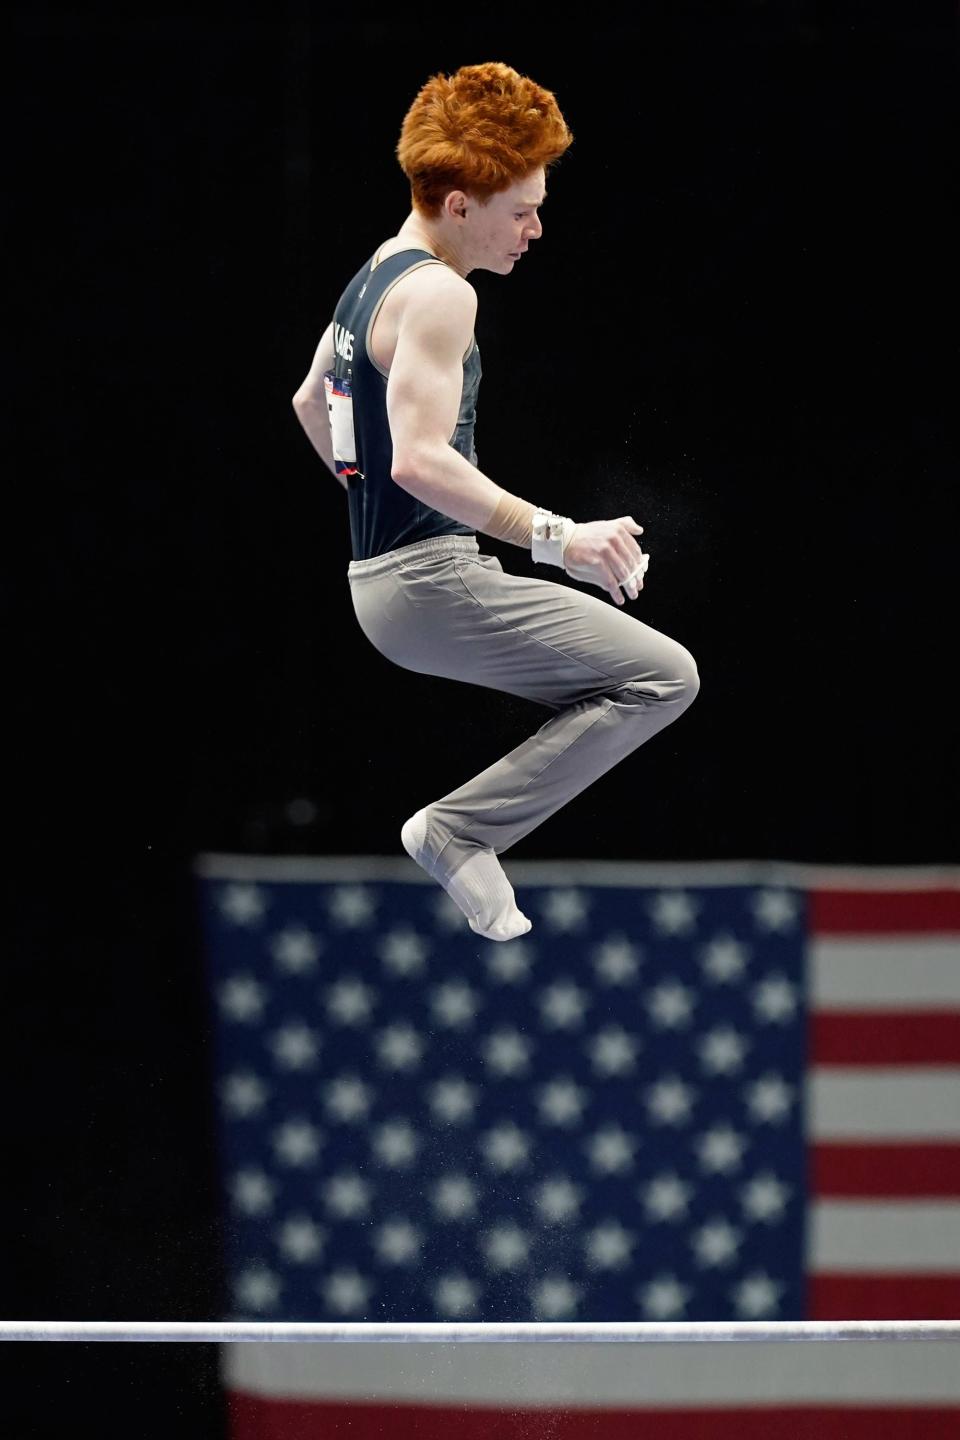 Joshua Karnes, of Penn State, competes on the high bar during the 2022 U.S. Gymnastics Championships Aug. 18 in Tampa, Fla. Karnes recently placed fourth in the all-around during the NCAA Division I Men's Gymnastic Championships at Penn State's Rec Hall.